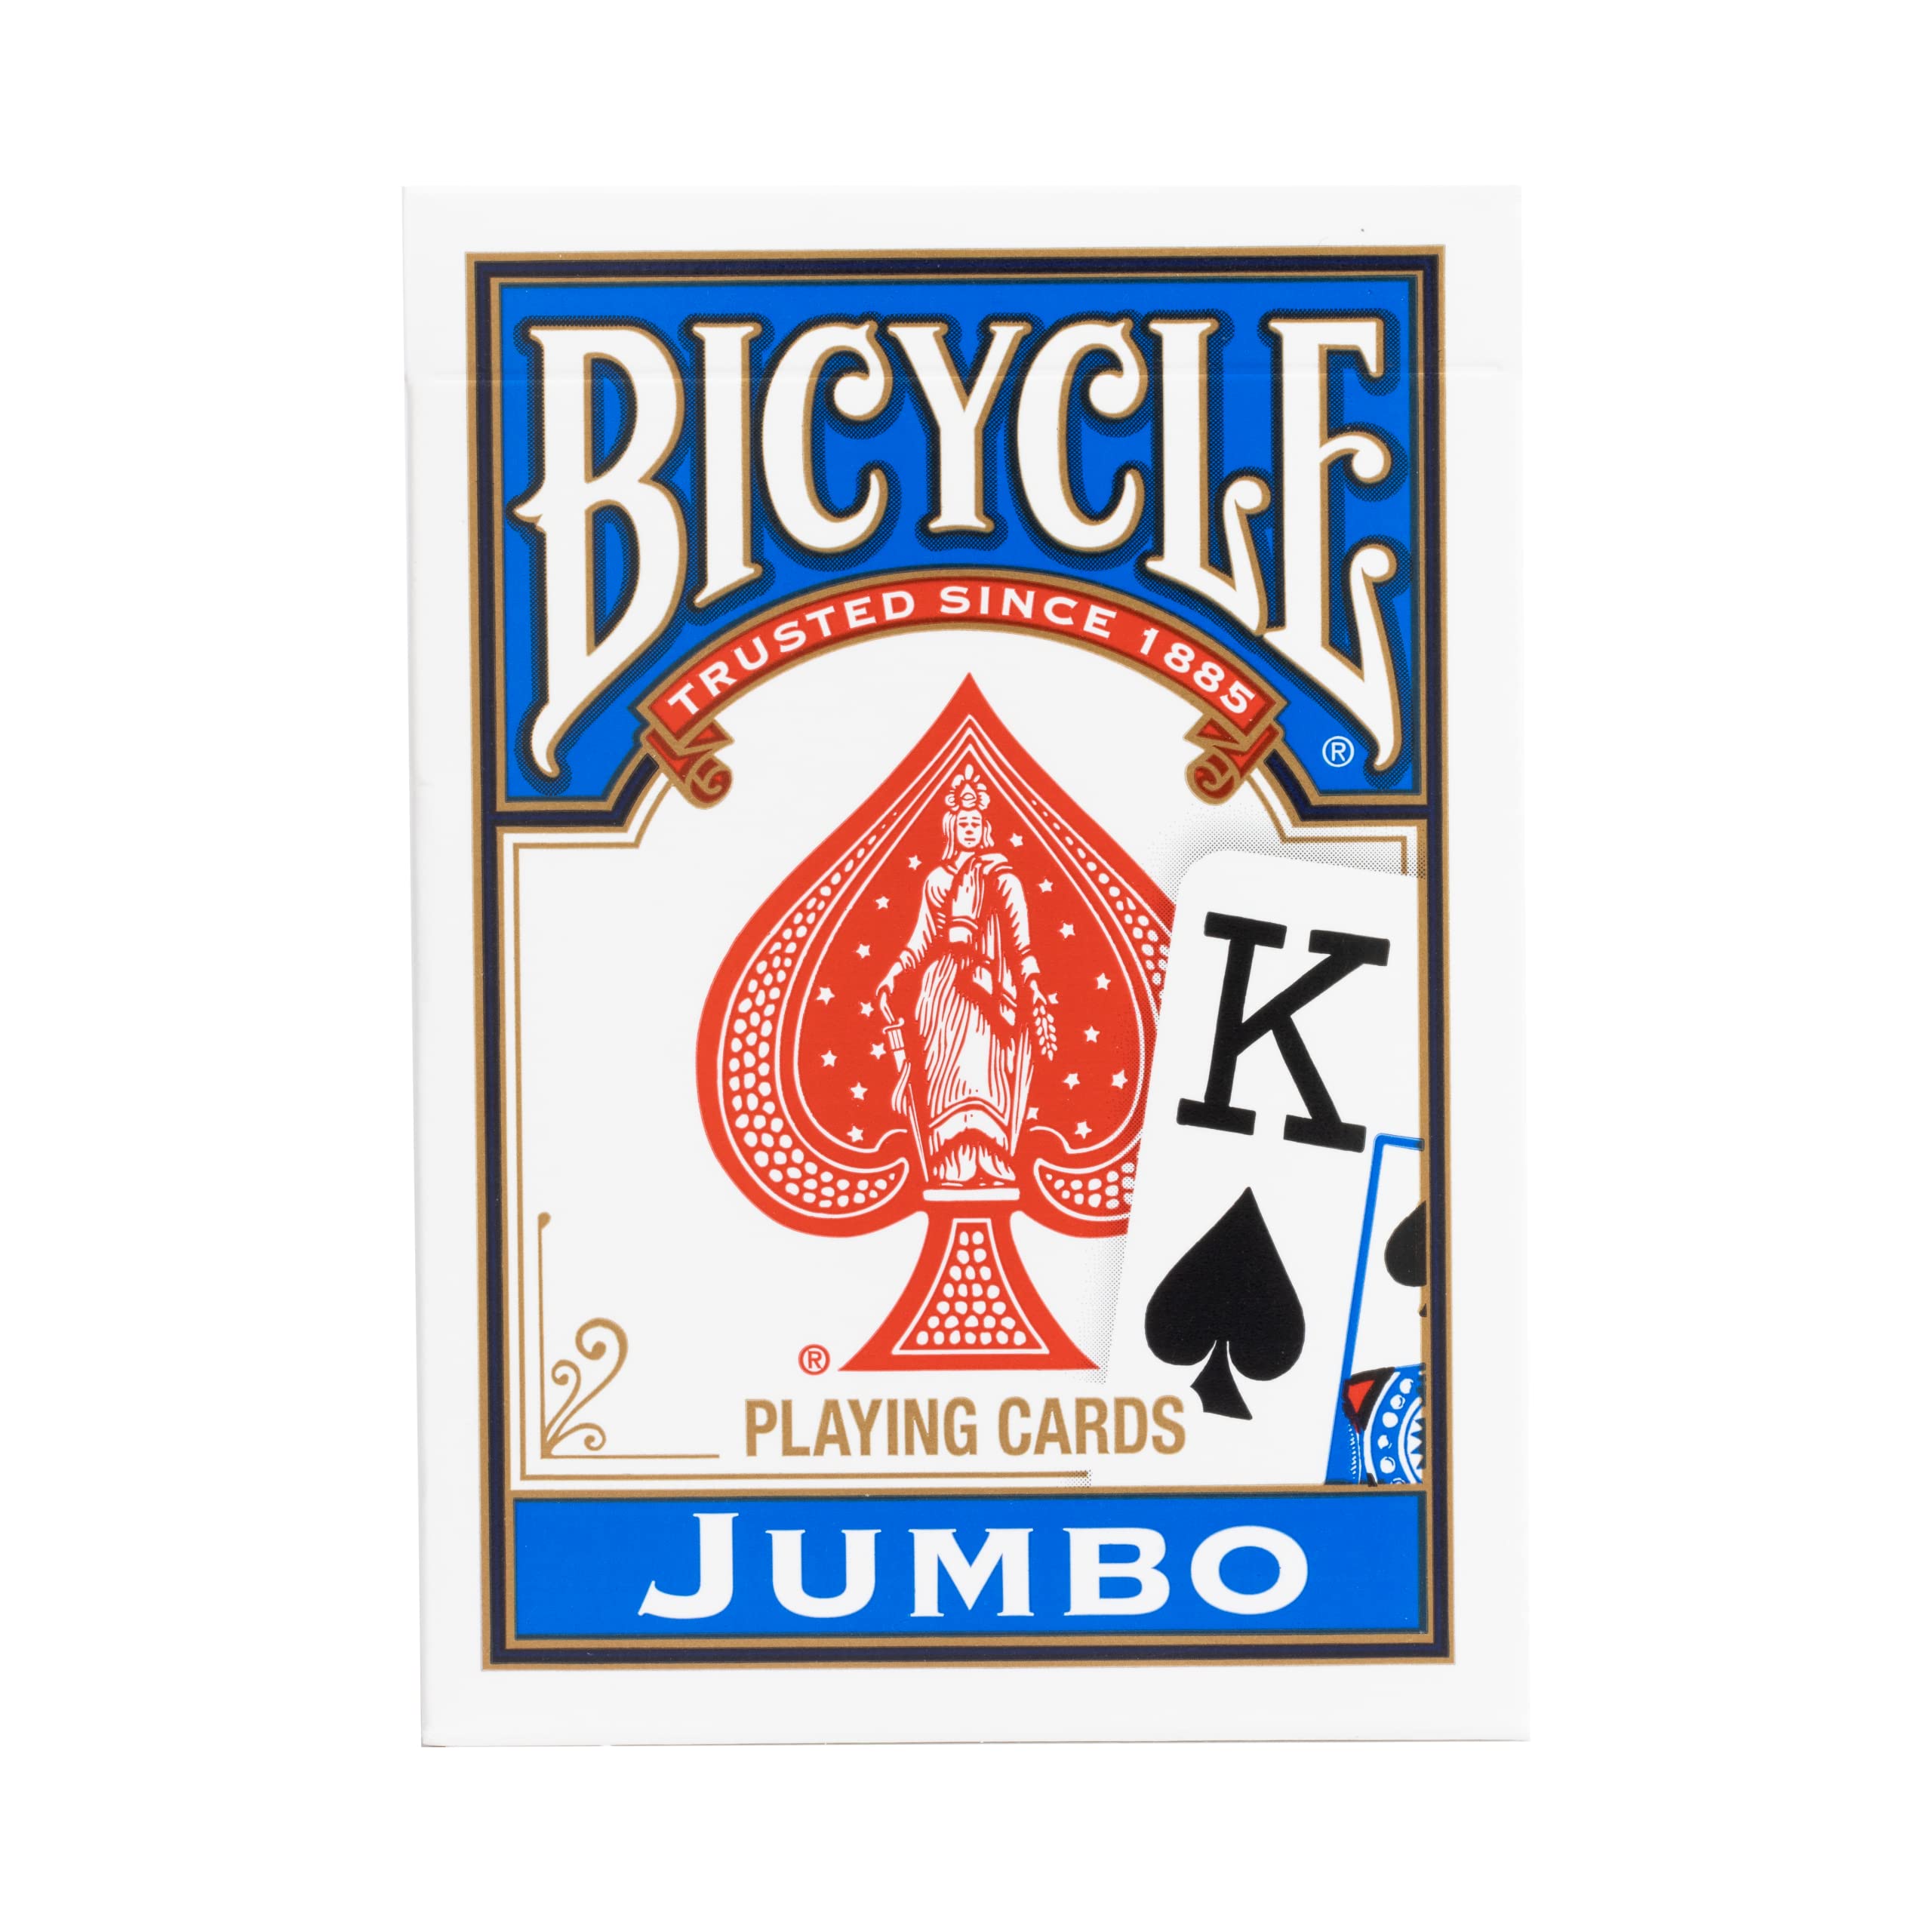 Bicycle Playing Cards, Jumbo Index, 2 Pack